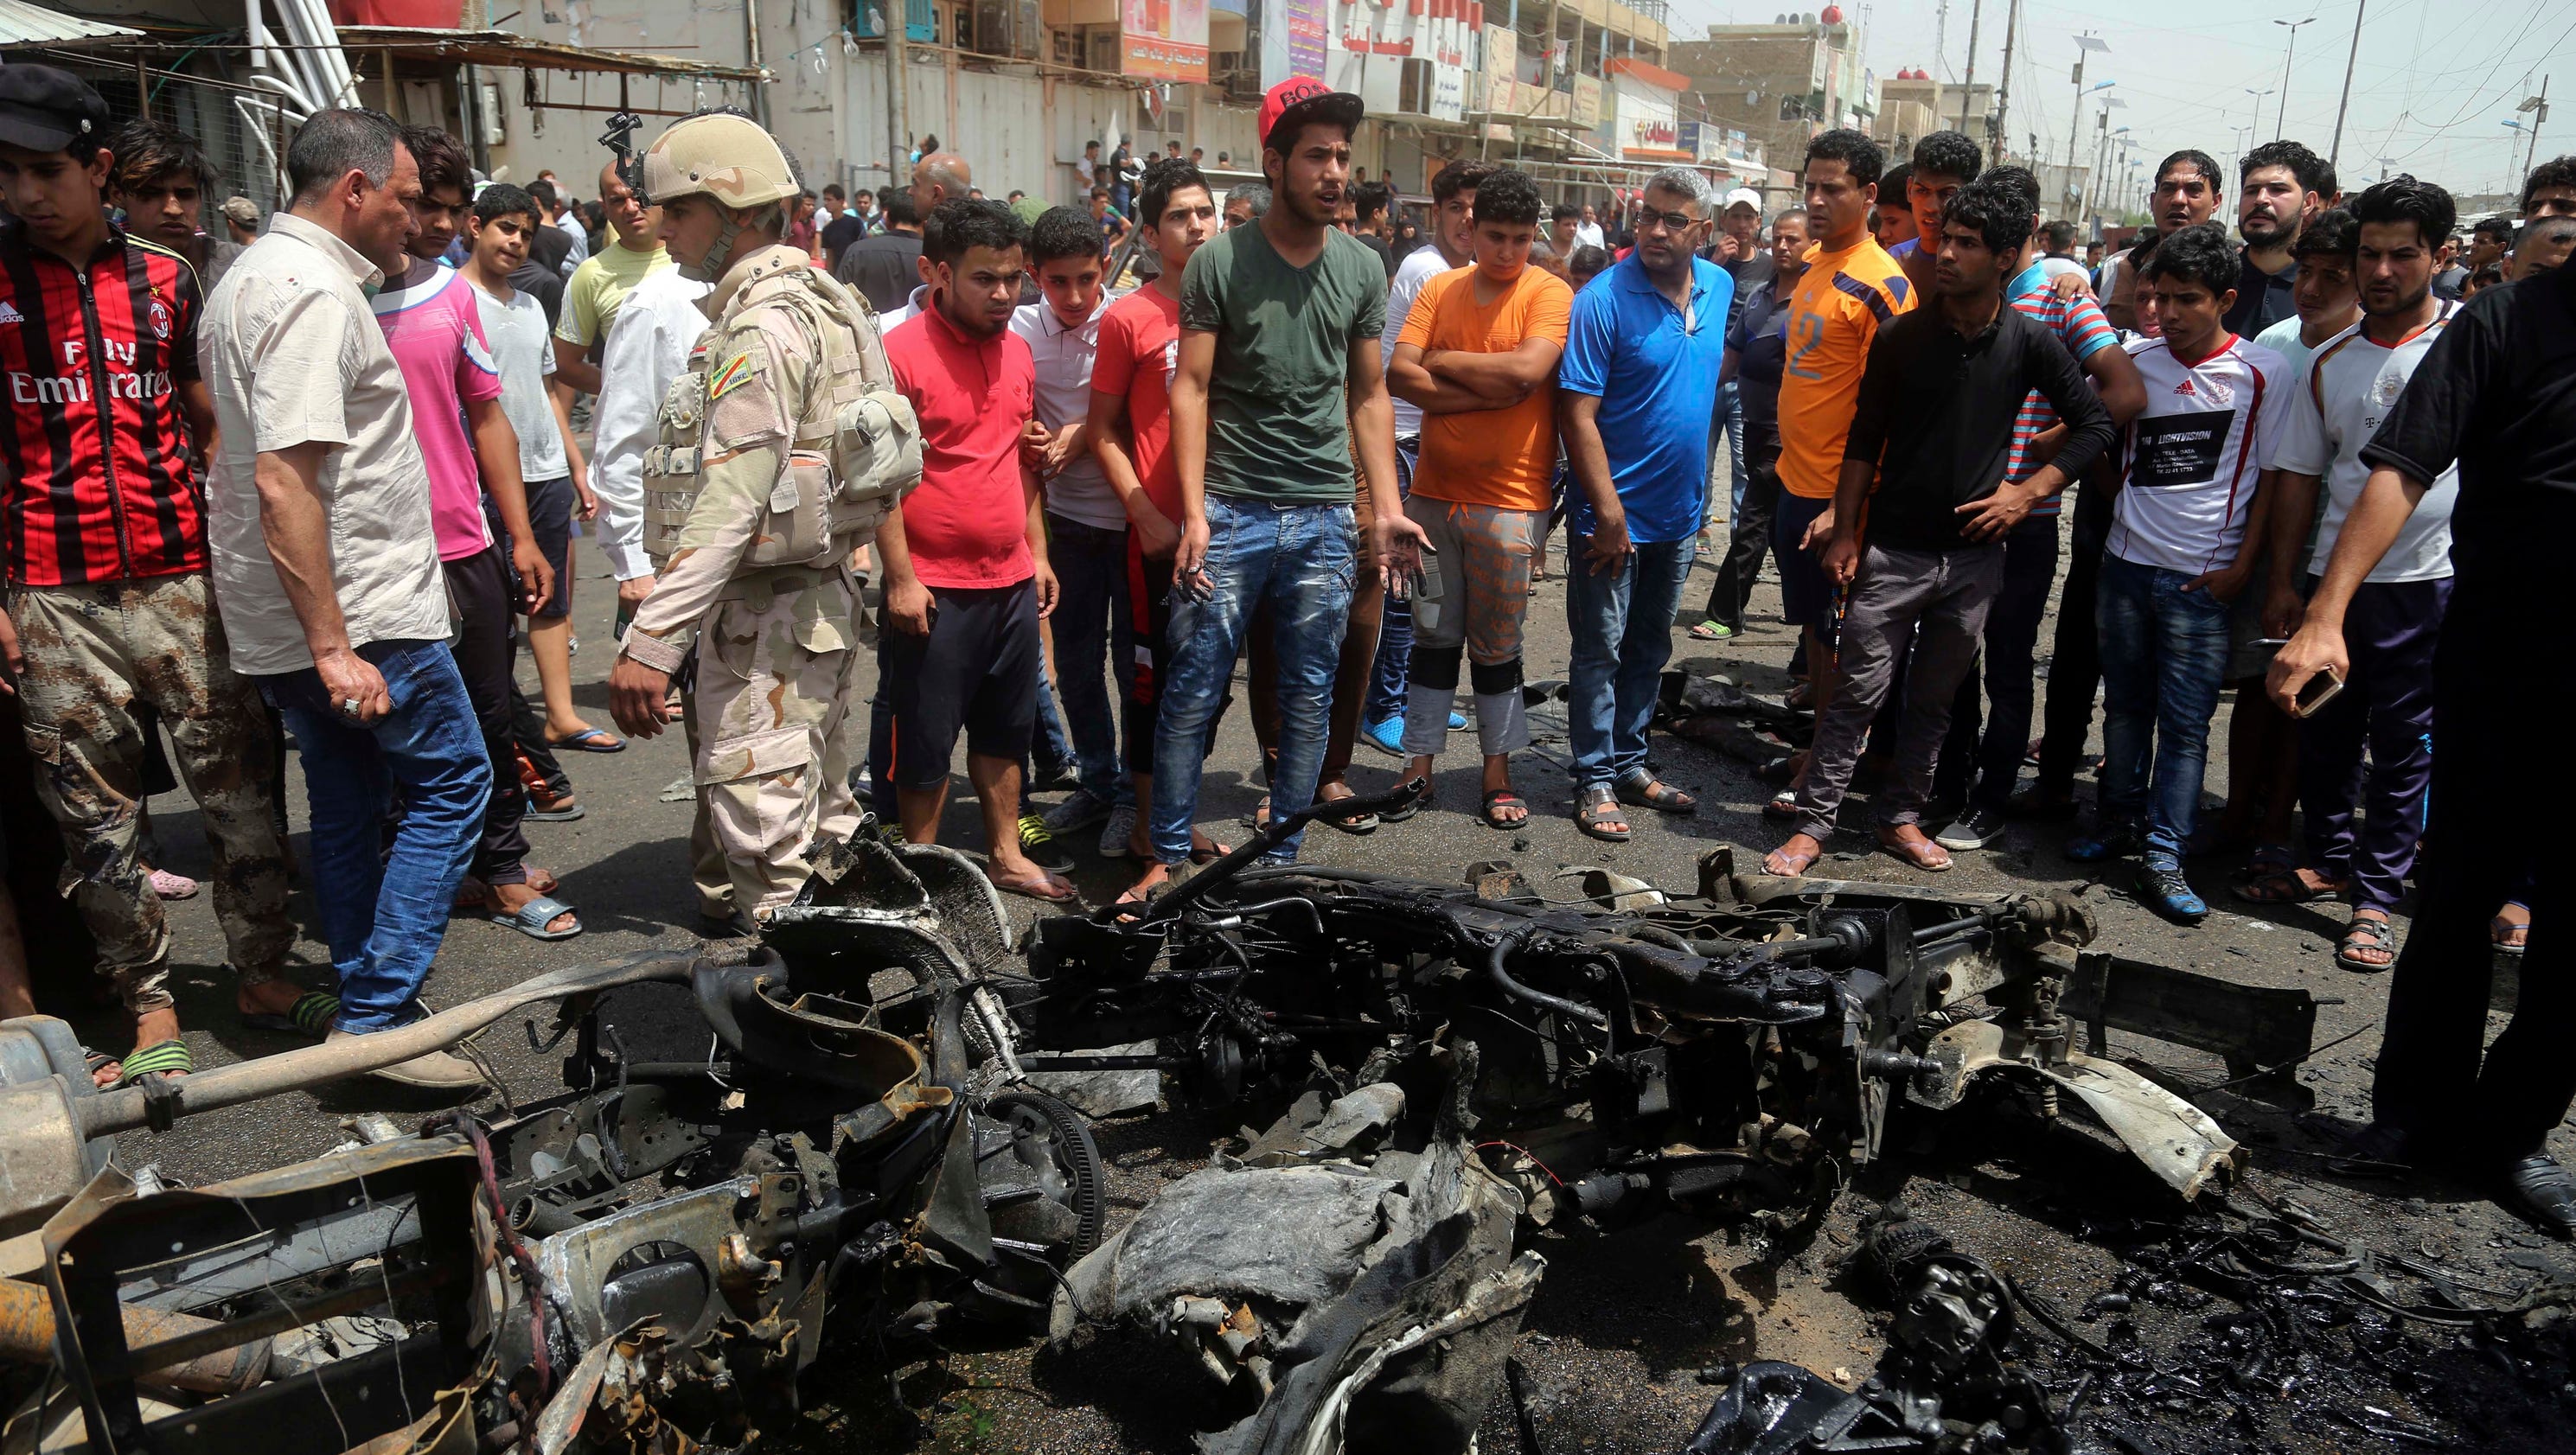 ISIL claims responsibility for 3 horrific bombings in Iraq3200 x 1680